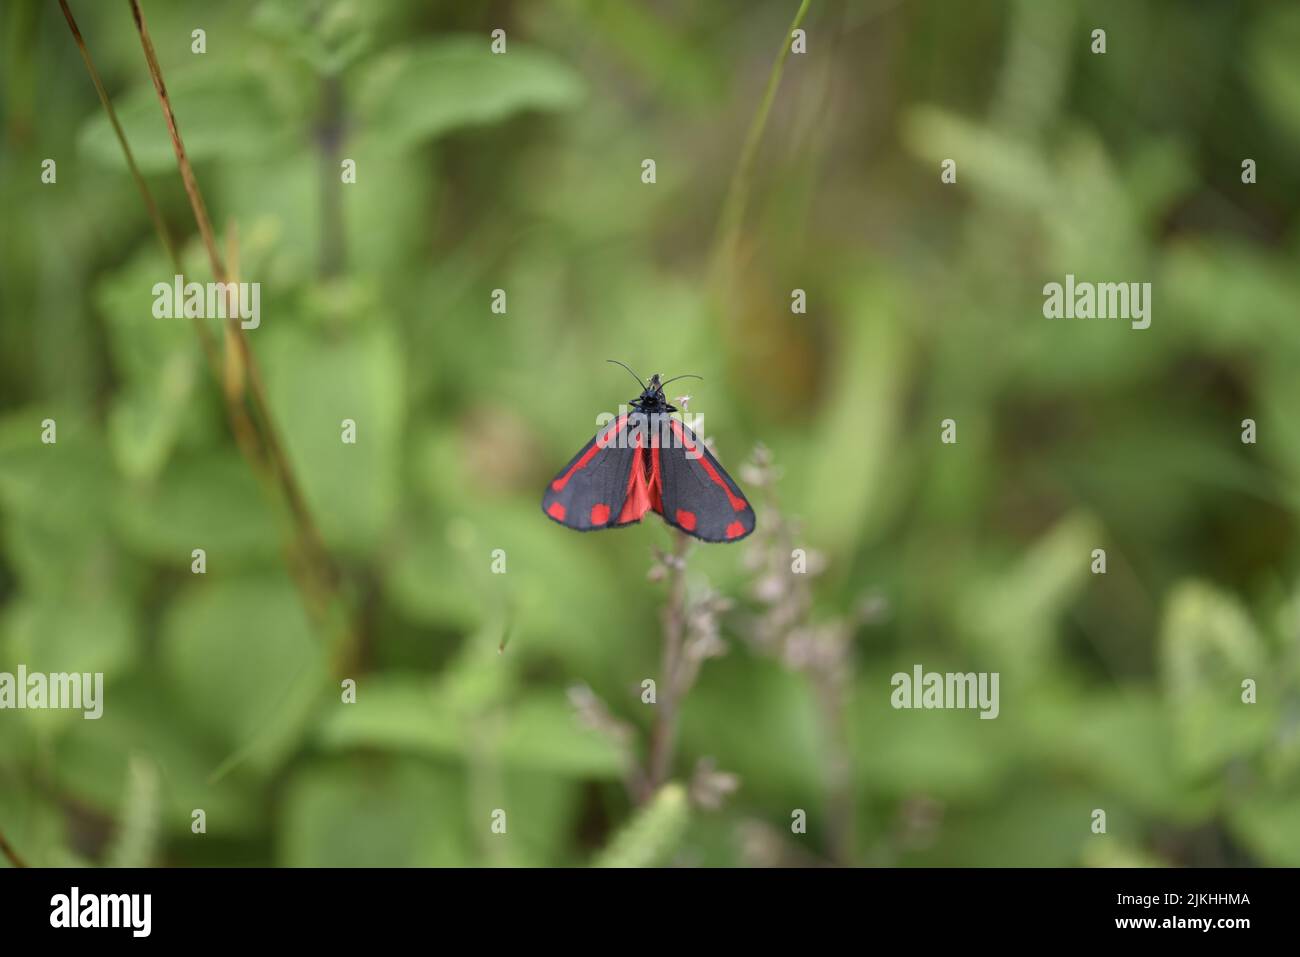 The Cinnabar Moth (Tyria jacobaeae) Perched on Top of a Stem with Wings Open and Markings Visible, Head Facing Up in Middle of Image, in the UK Stock Photo